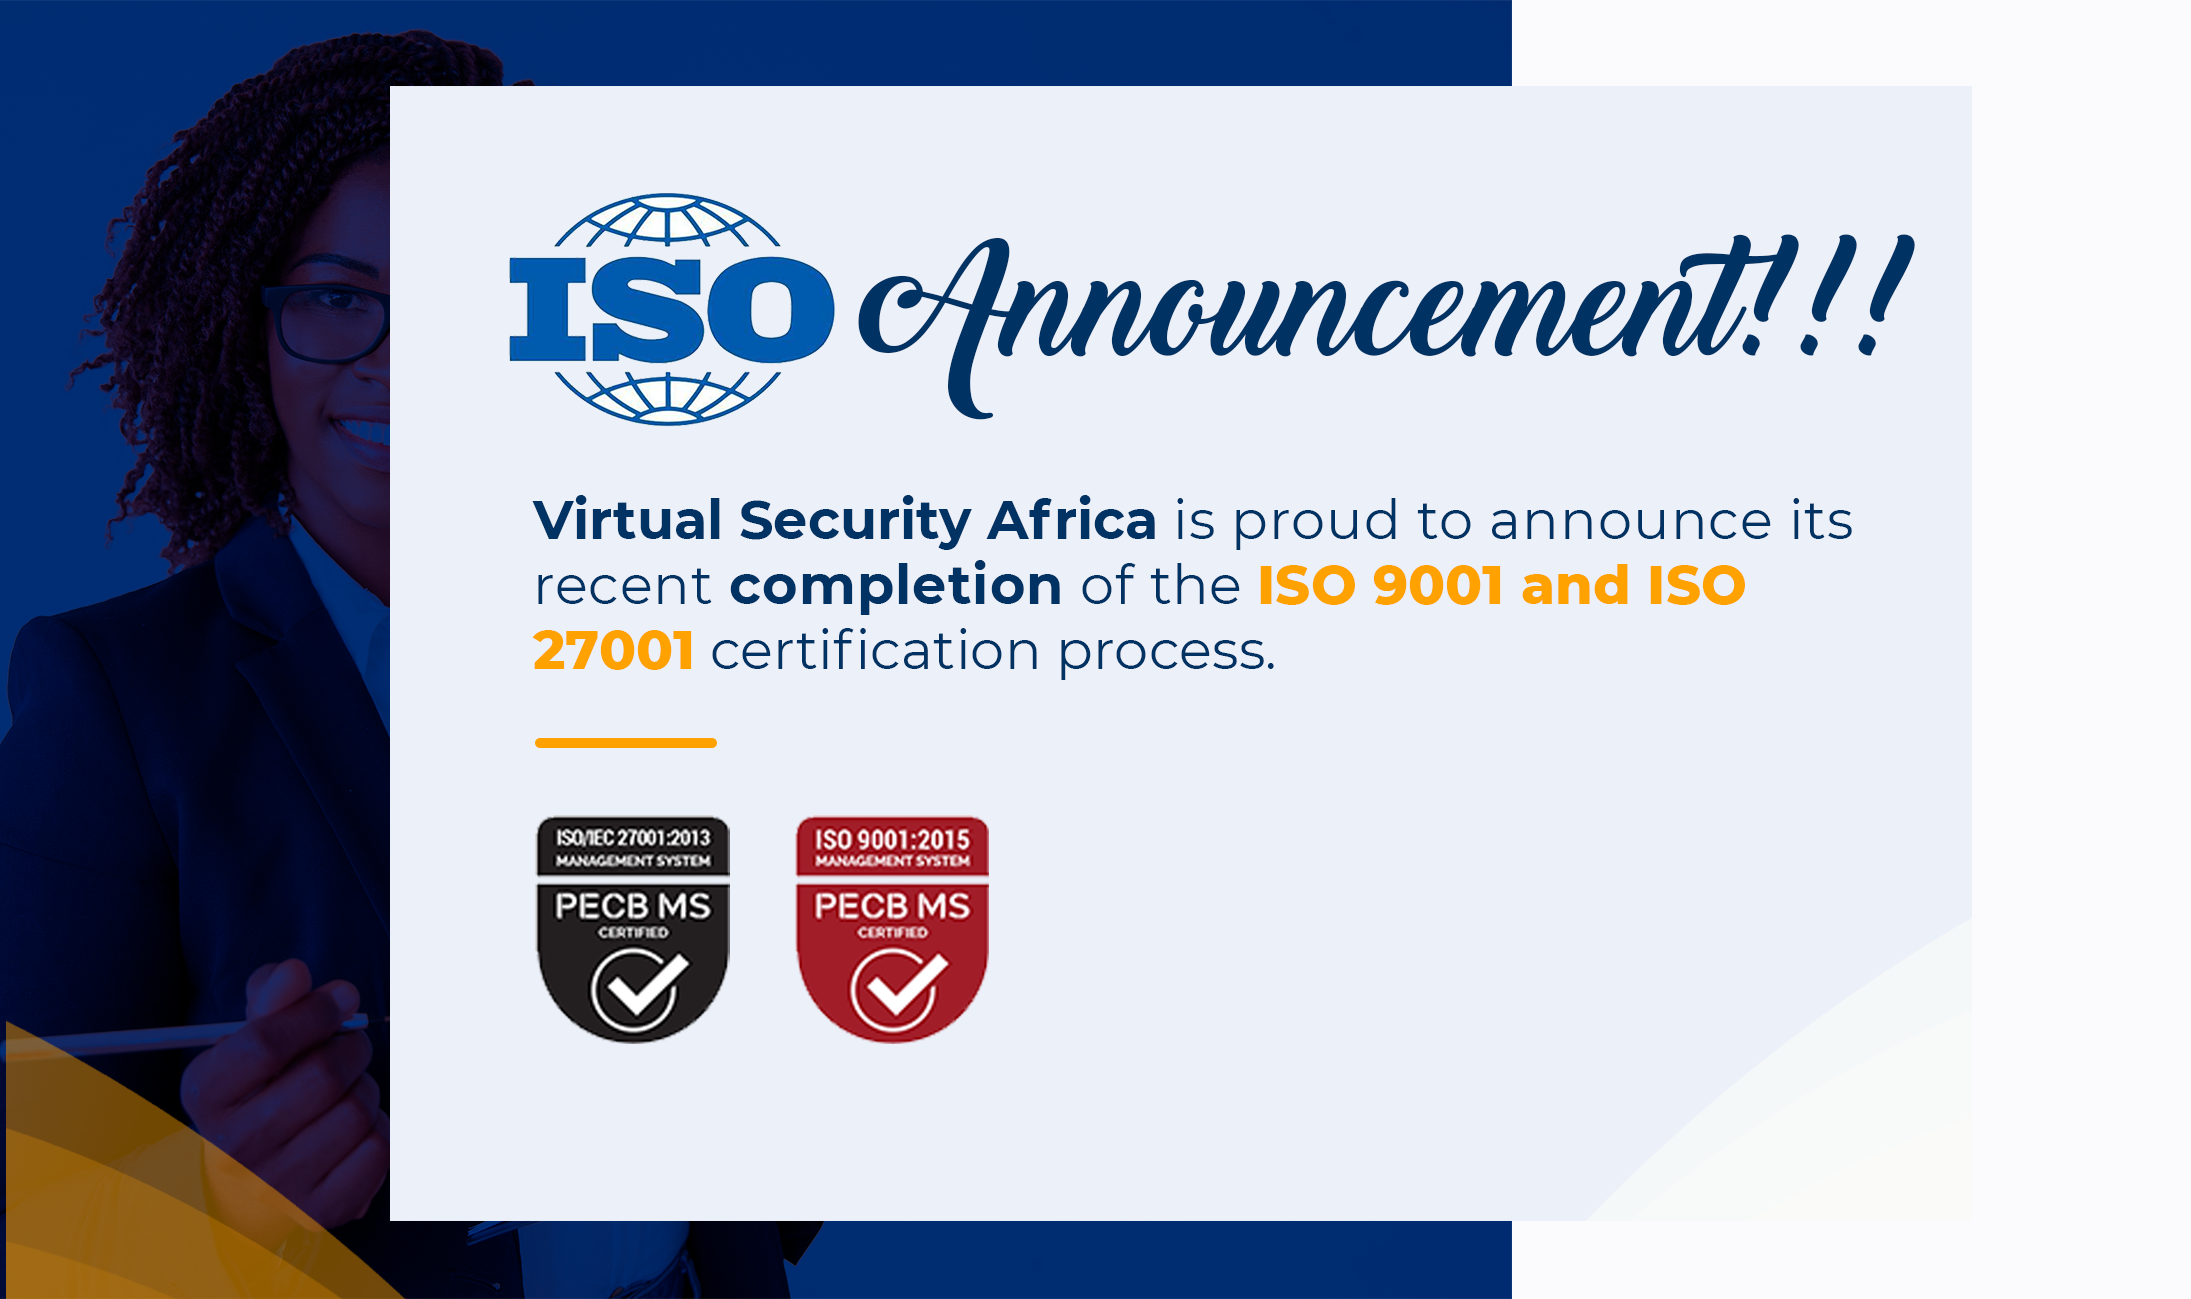 ISO Announcement